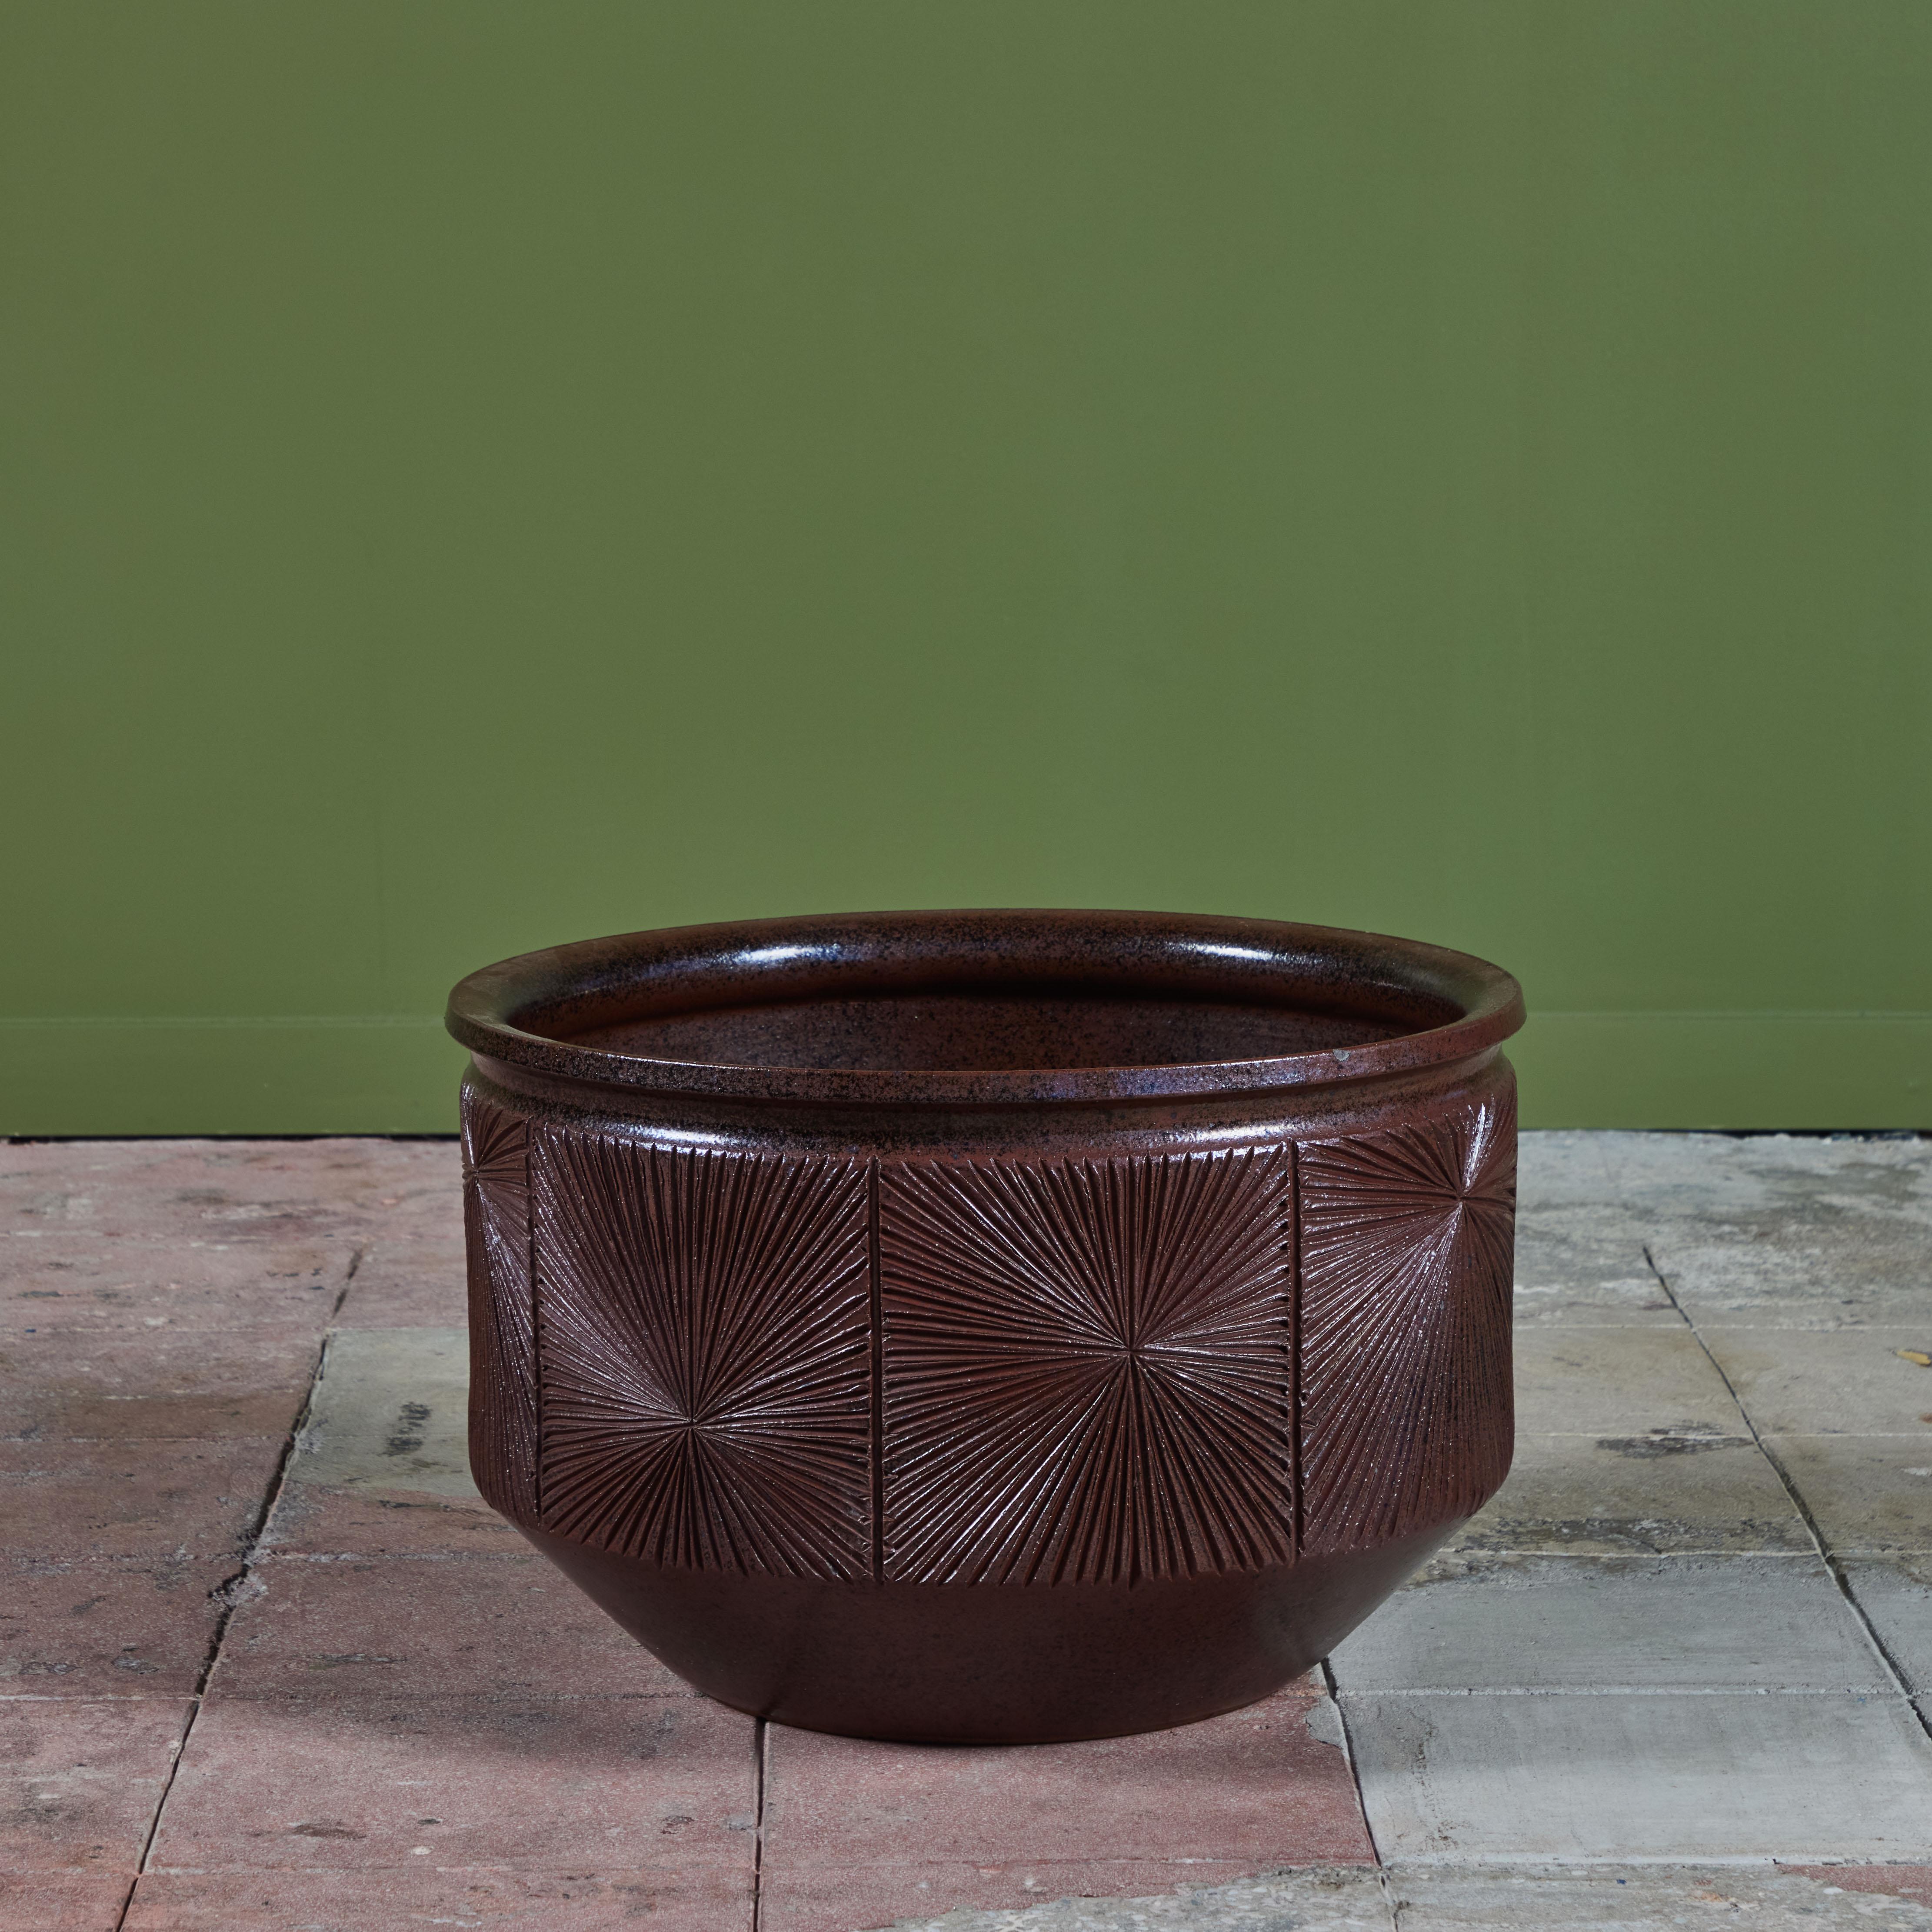 David Cressey & Robert Maxwell “Sunburst” Plum Glazed Planter for Earthgender In Excellent Condition For Sale In Los Angeles, CA